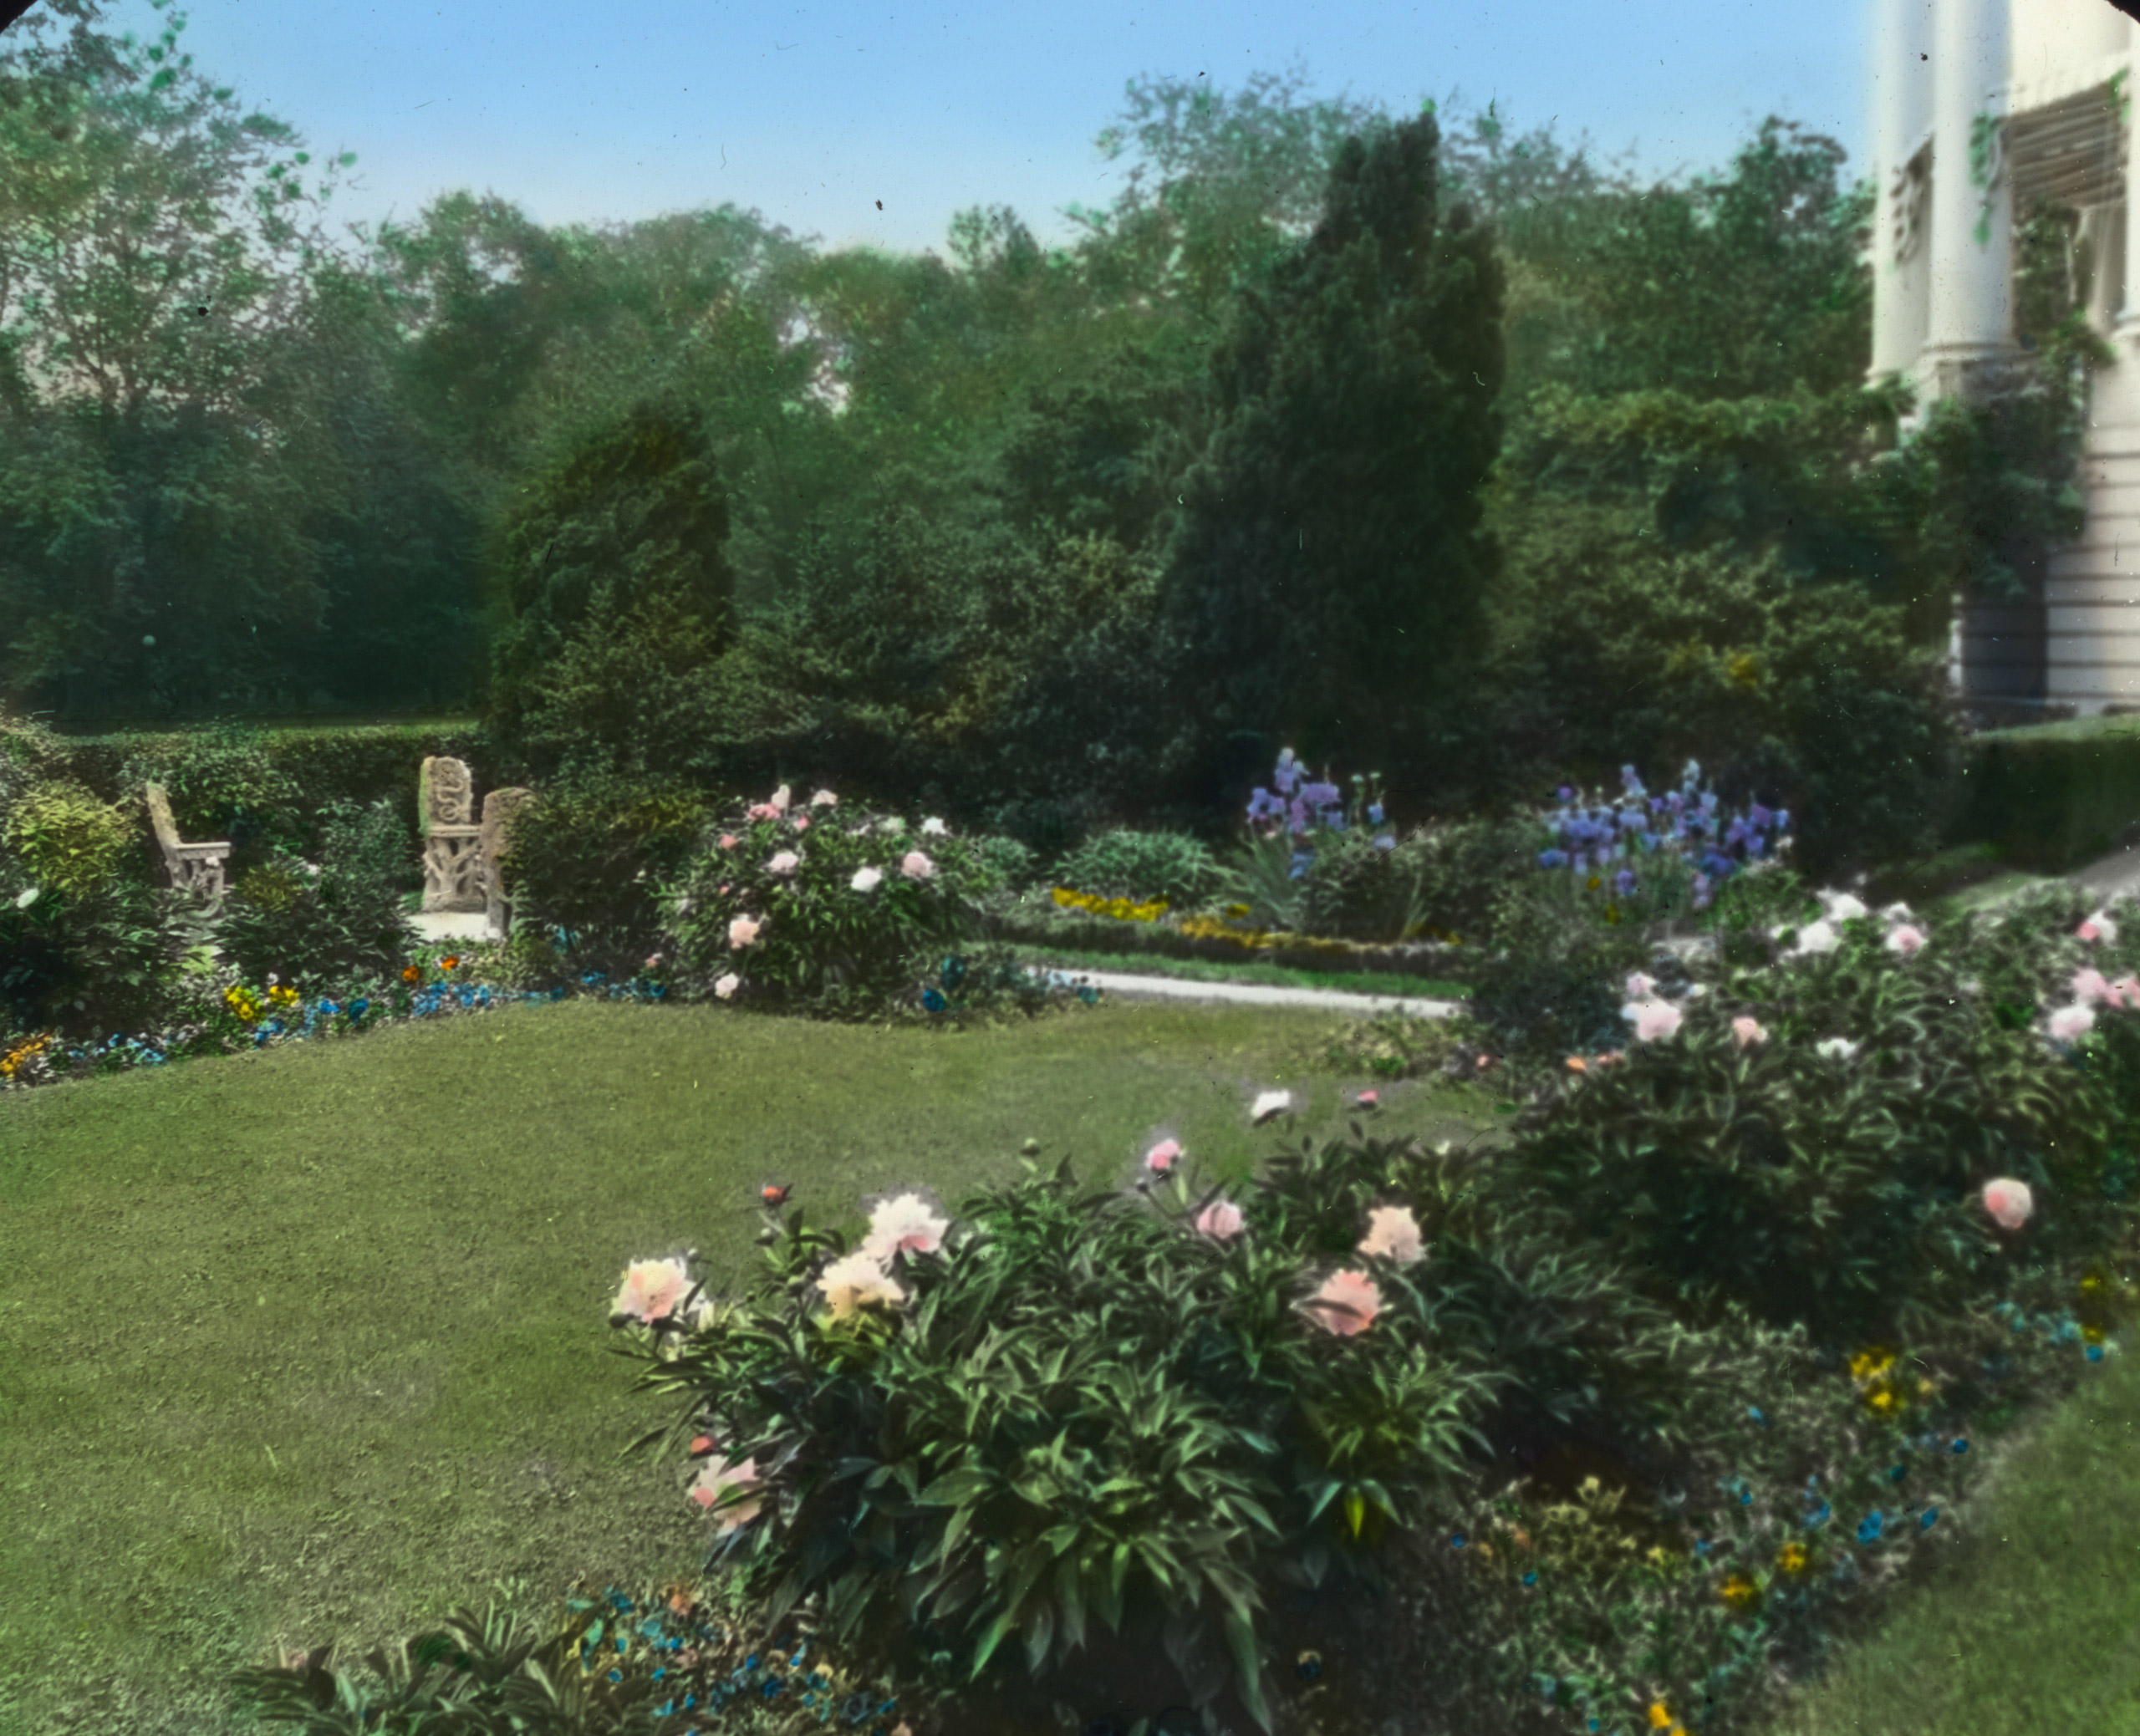 Spring in the East Garden 1920s is full of peonies, pansies and irises in this hand-colored glass slide by Frances Benjamin Johnston.